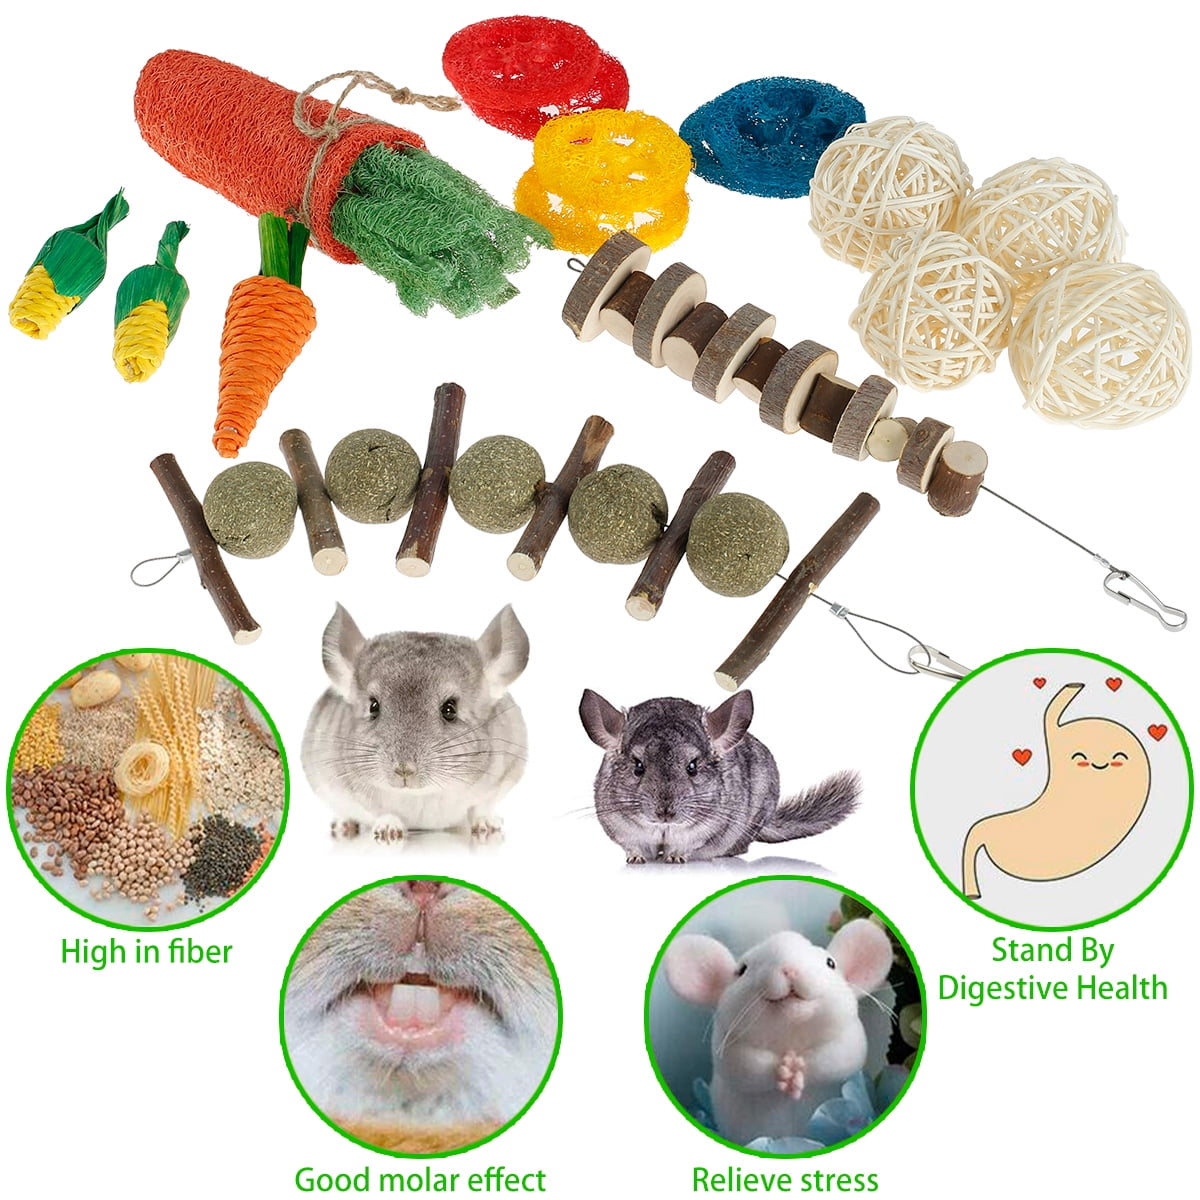 Rabbit Chew Toys Set Carrot & Corn Teeth Grinding Chewers,Natural Bunny Toys for Dental Health,Safe Durable Braided Pet Knot,Gifts for Rabbit Bunny Hamster Small Animals 